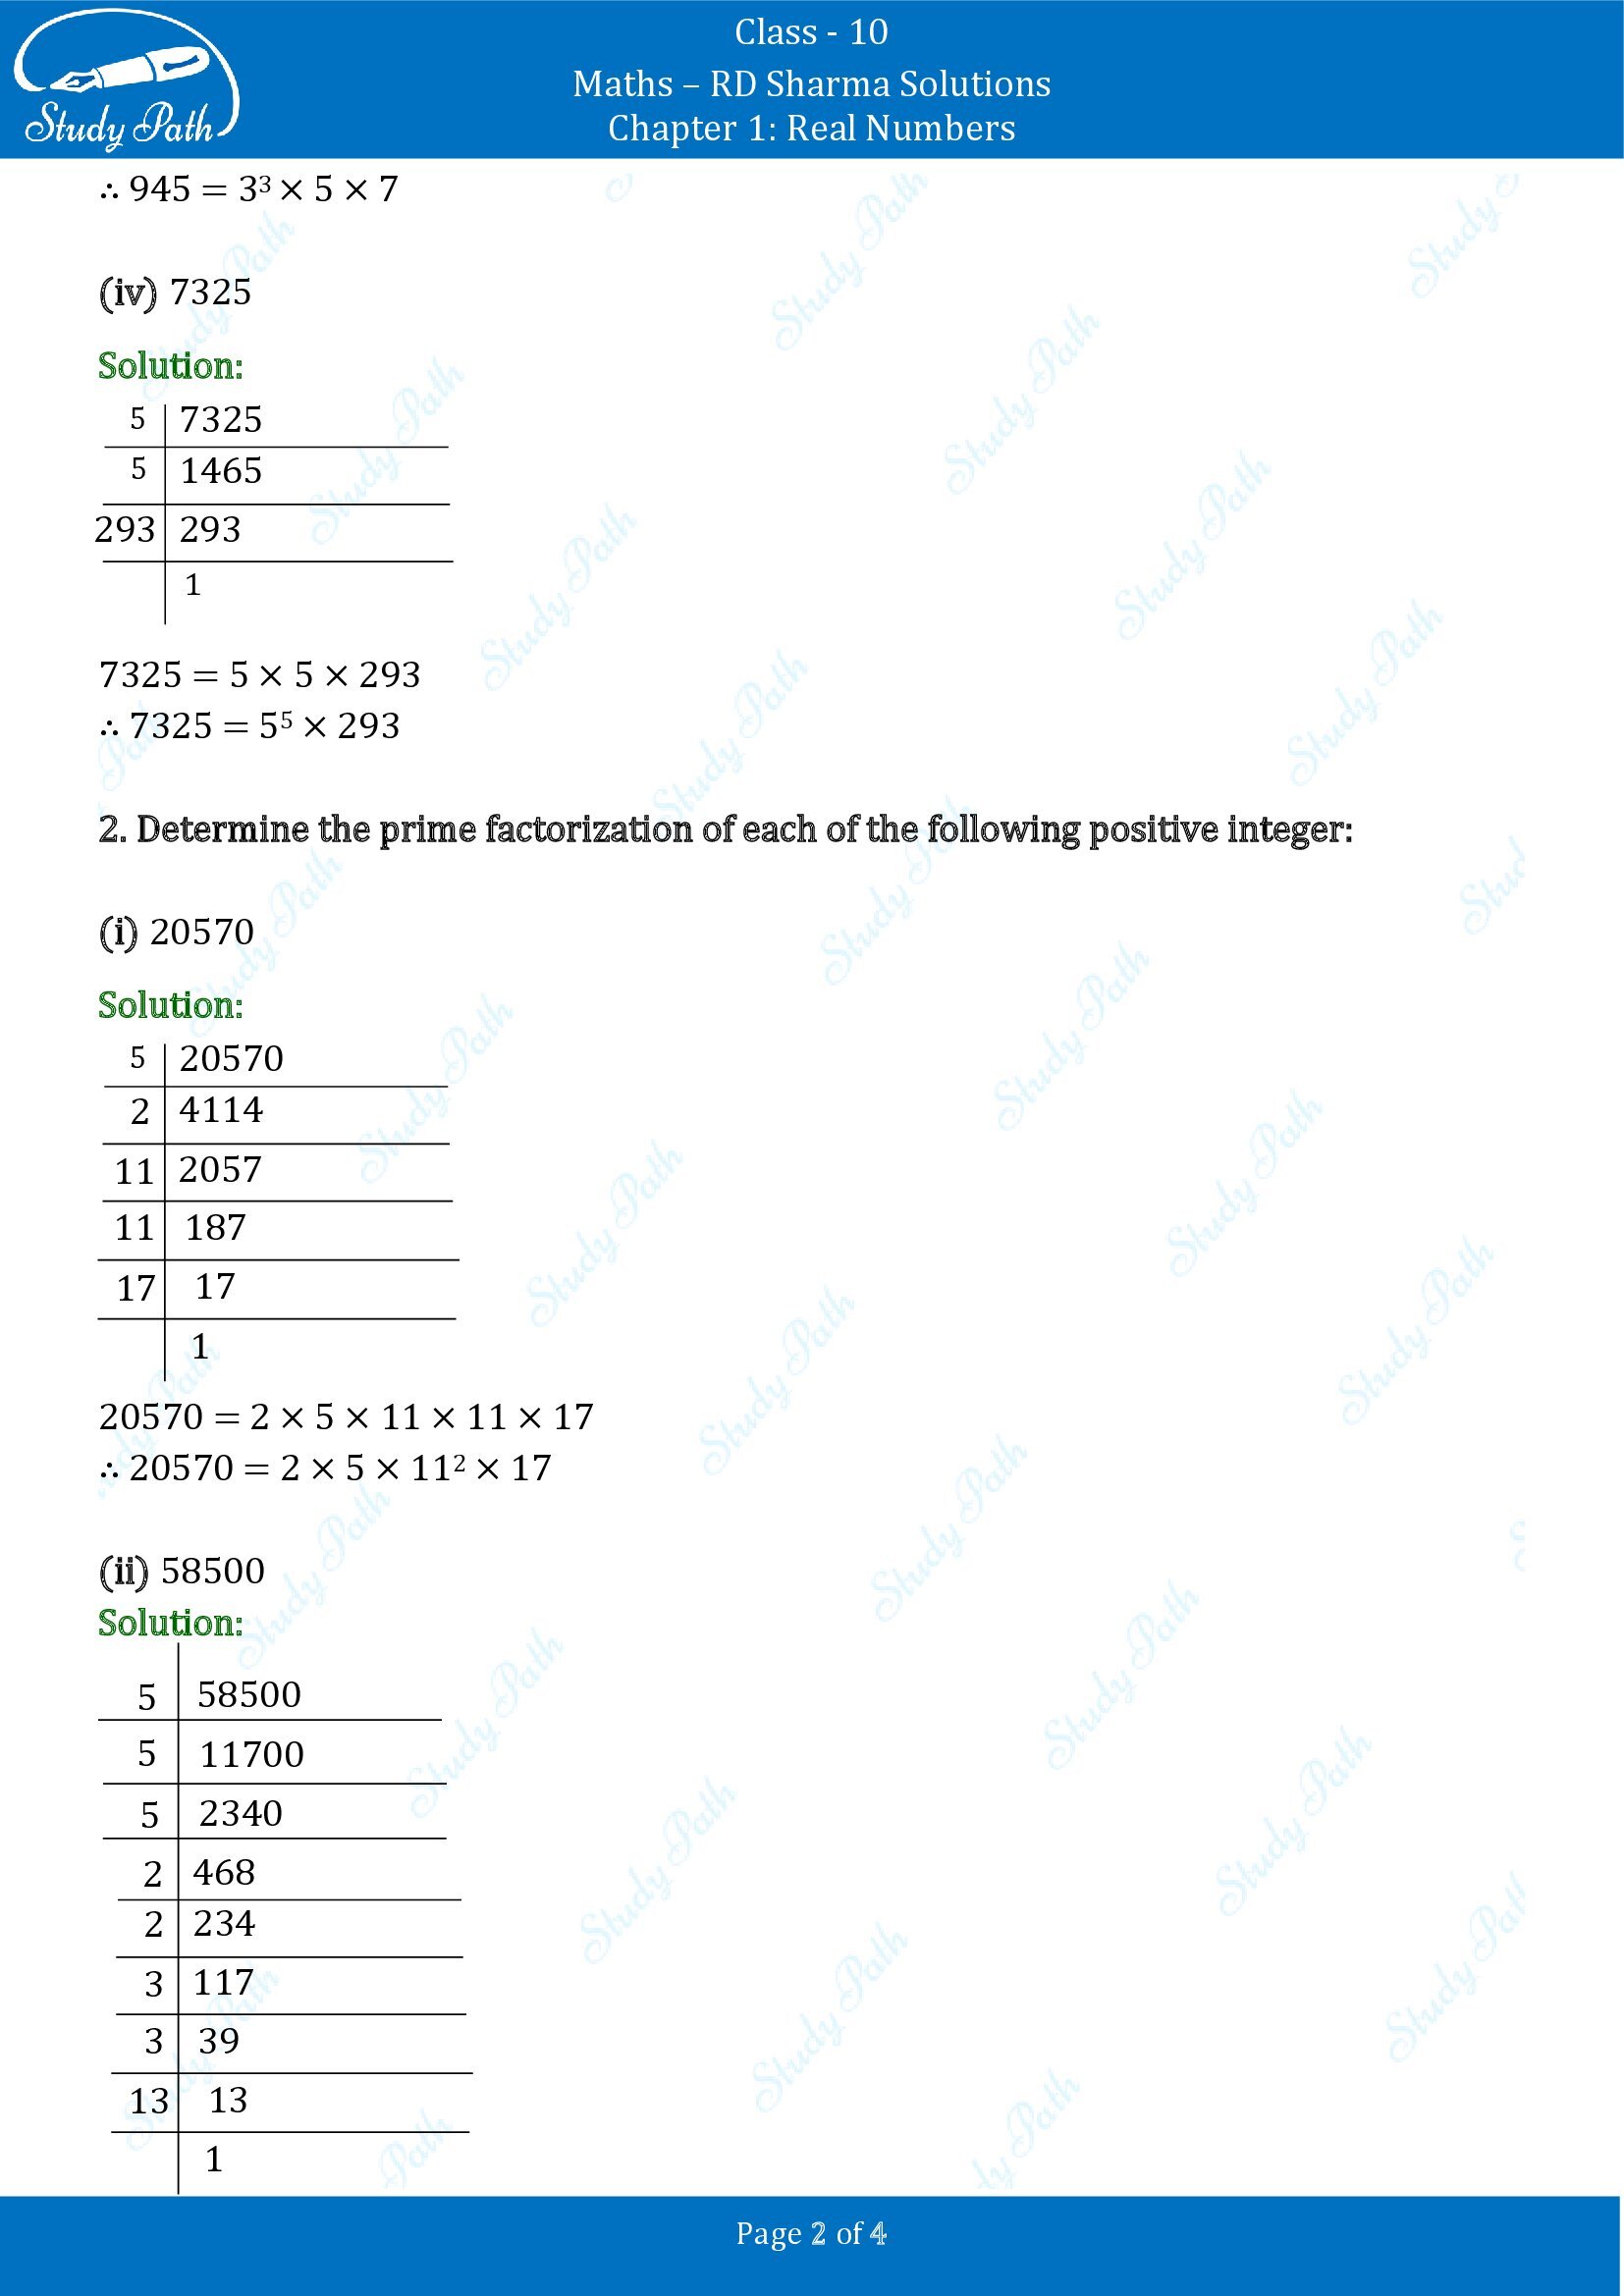 RD Sharma Solutions Class 10 Chapter 1 Real Numbers Exercise 1.3 00002